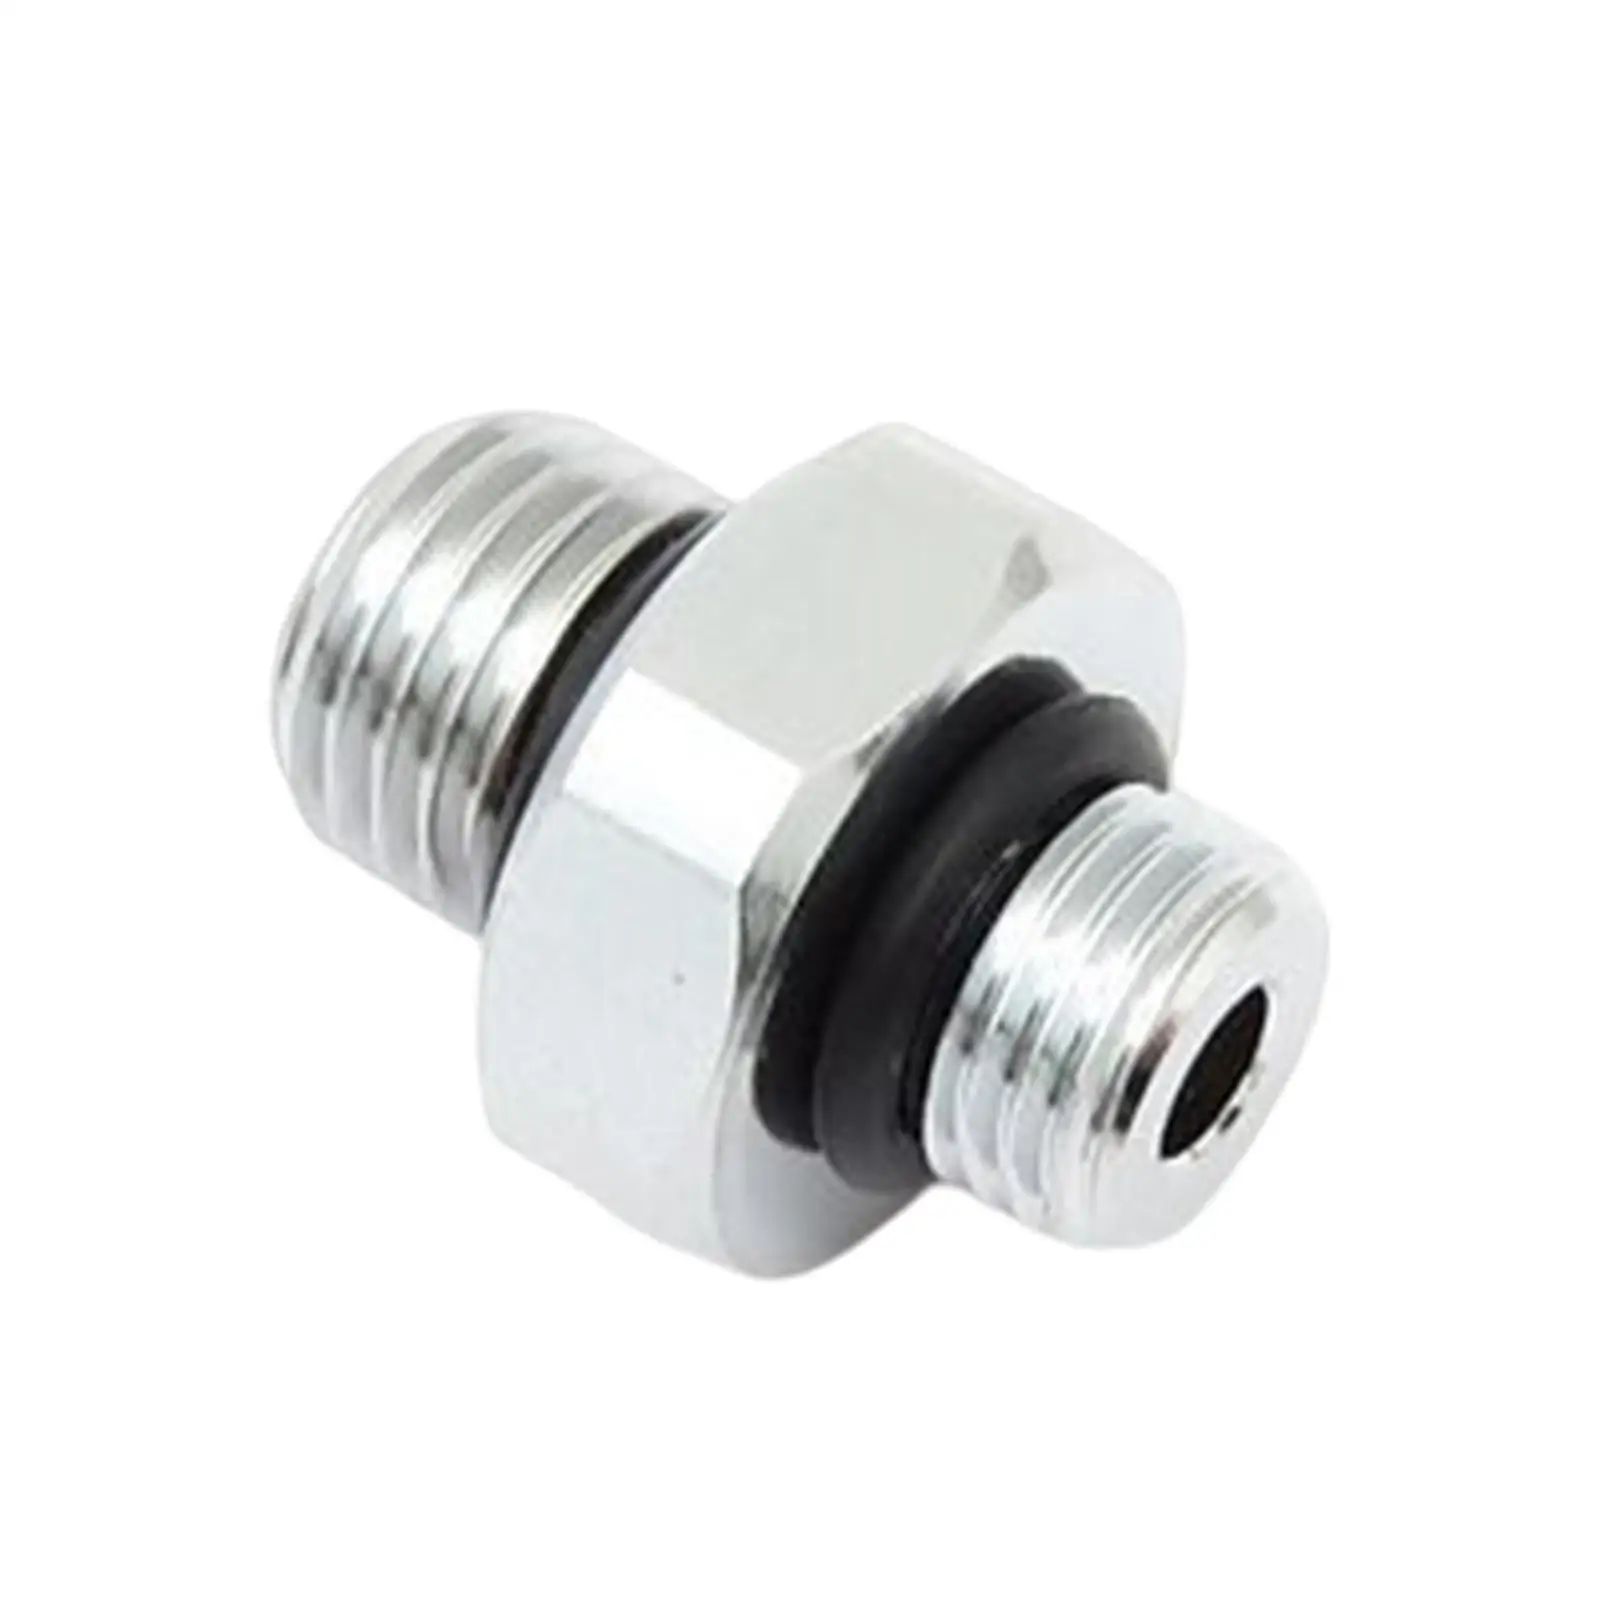 7/16-20HP and 3/8-24LP BCD Connector, Adaptor Metal Scuba Diving Dive for Snorkeling Diver Surfing Diving Equipment